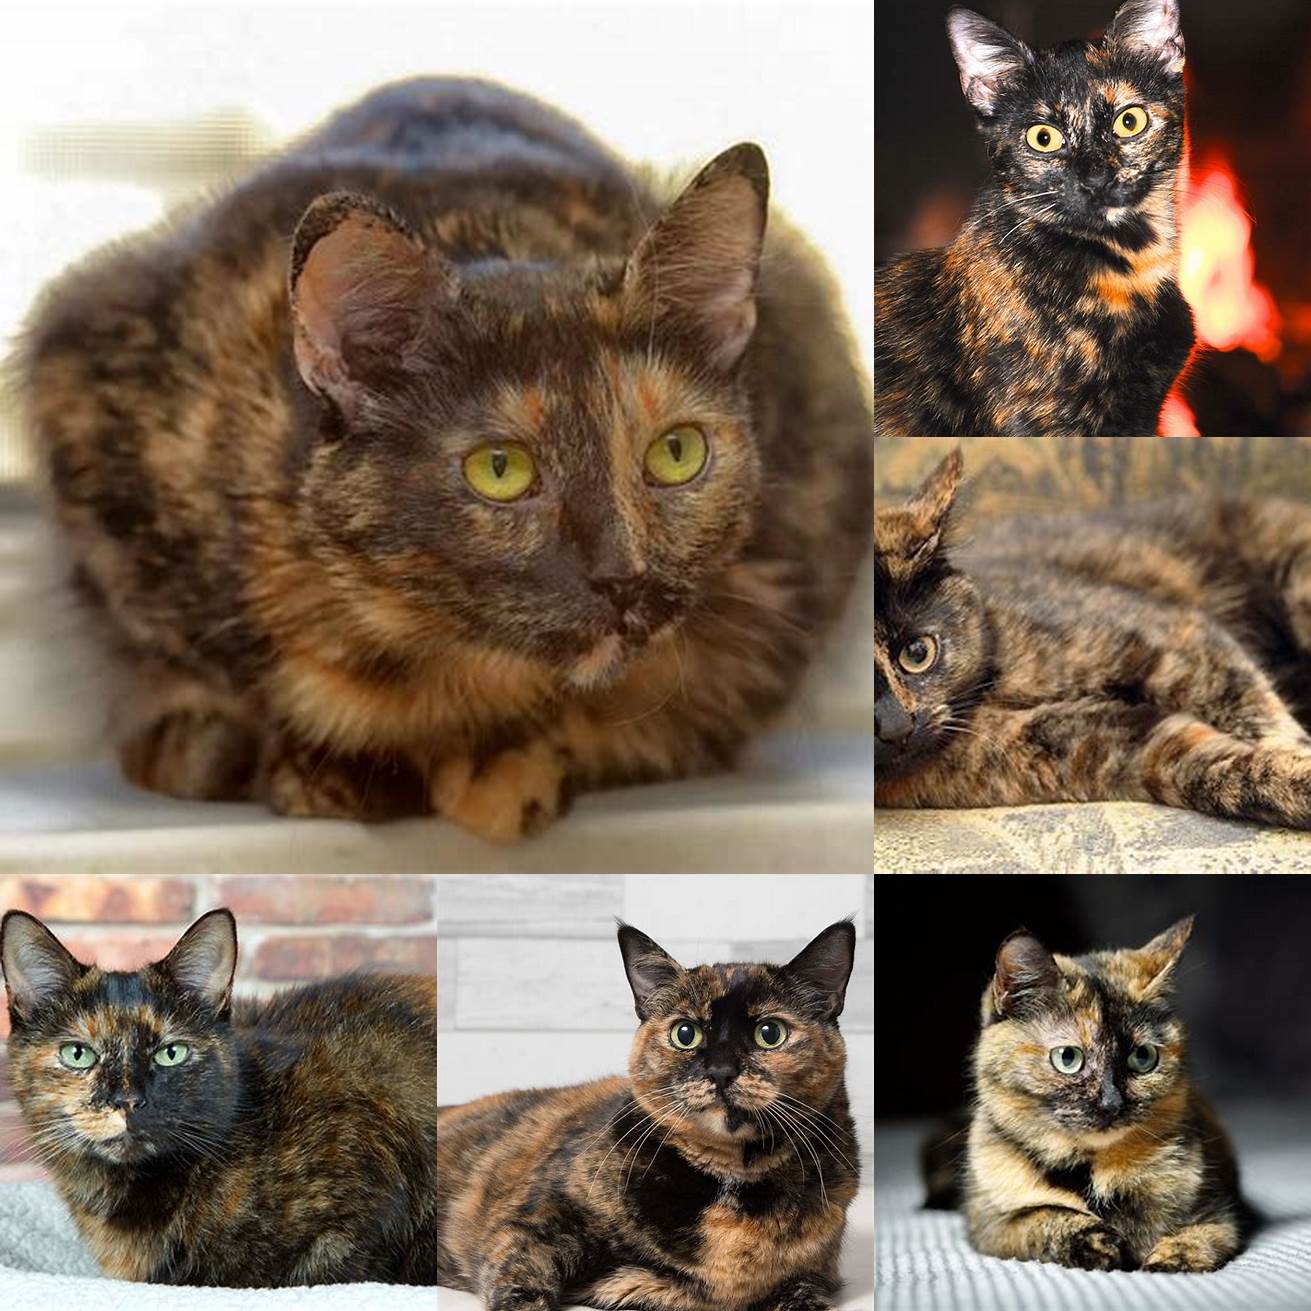 Tortoiseshell cats are not a specific breed